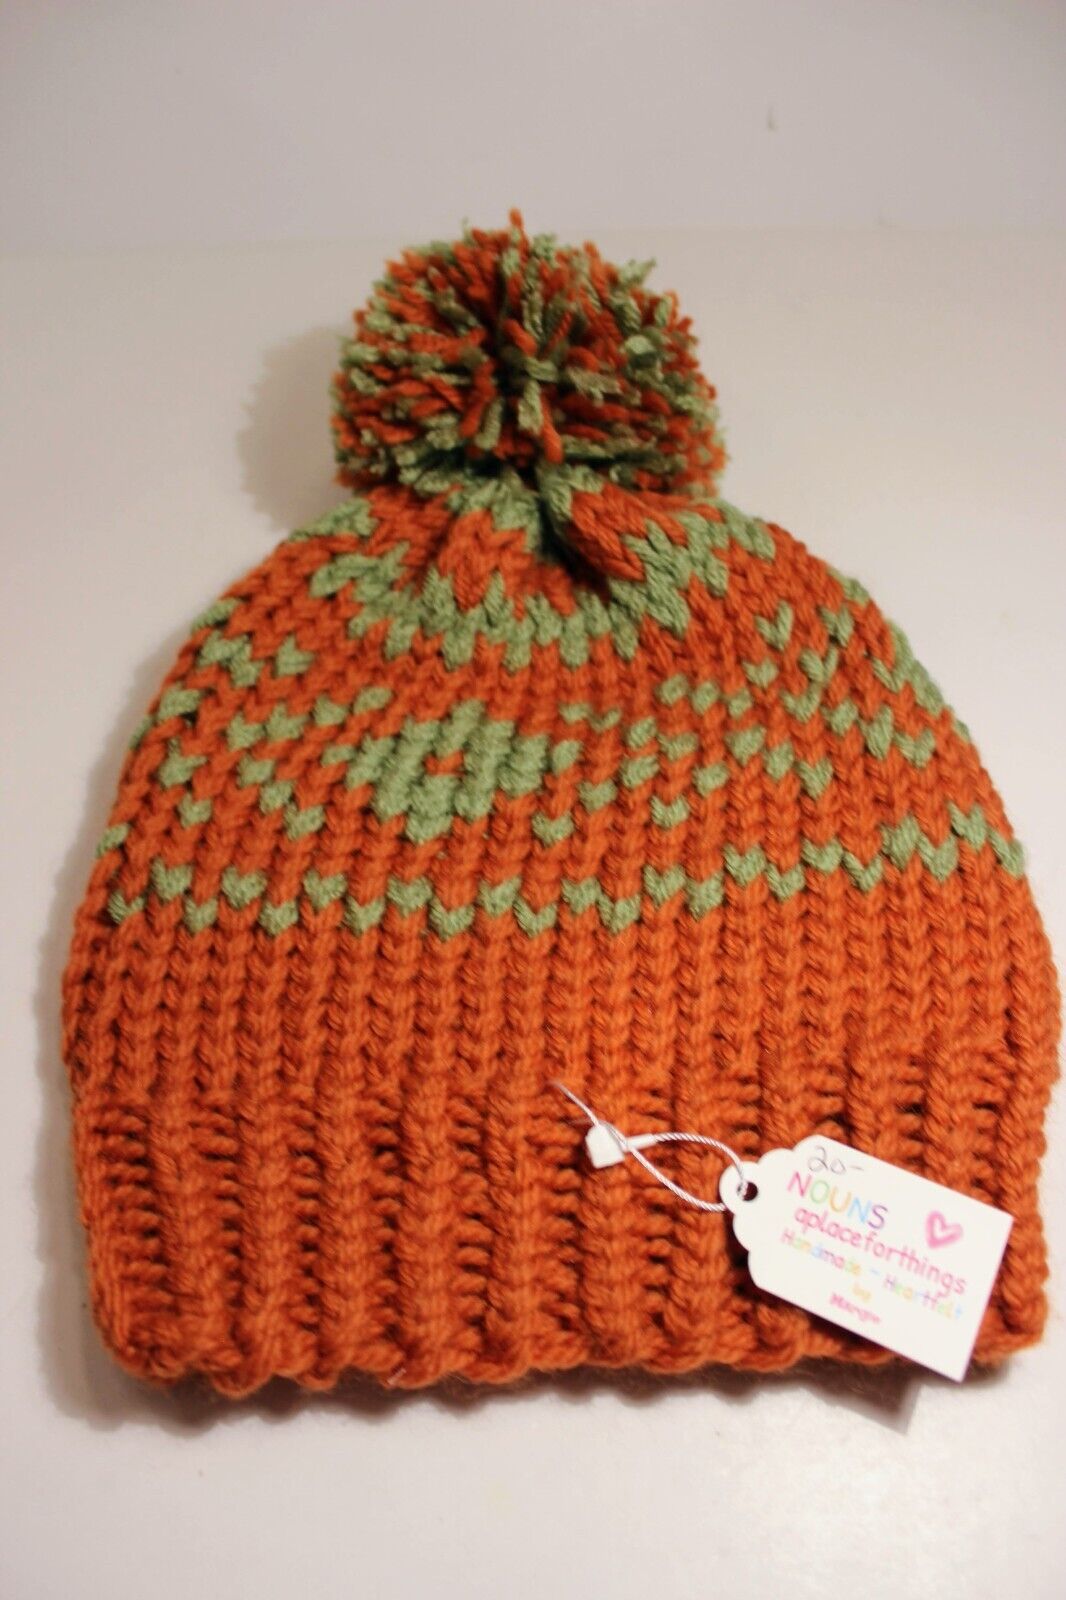 Hand Knit Women's Hat Fall Colors Fair Isle Style Orange & Green With Pompom